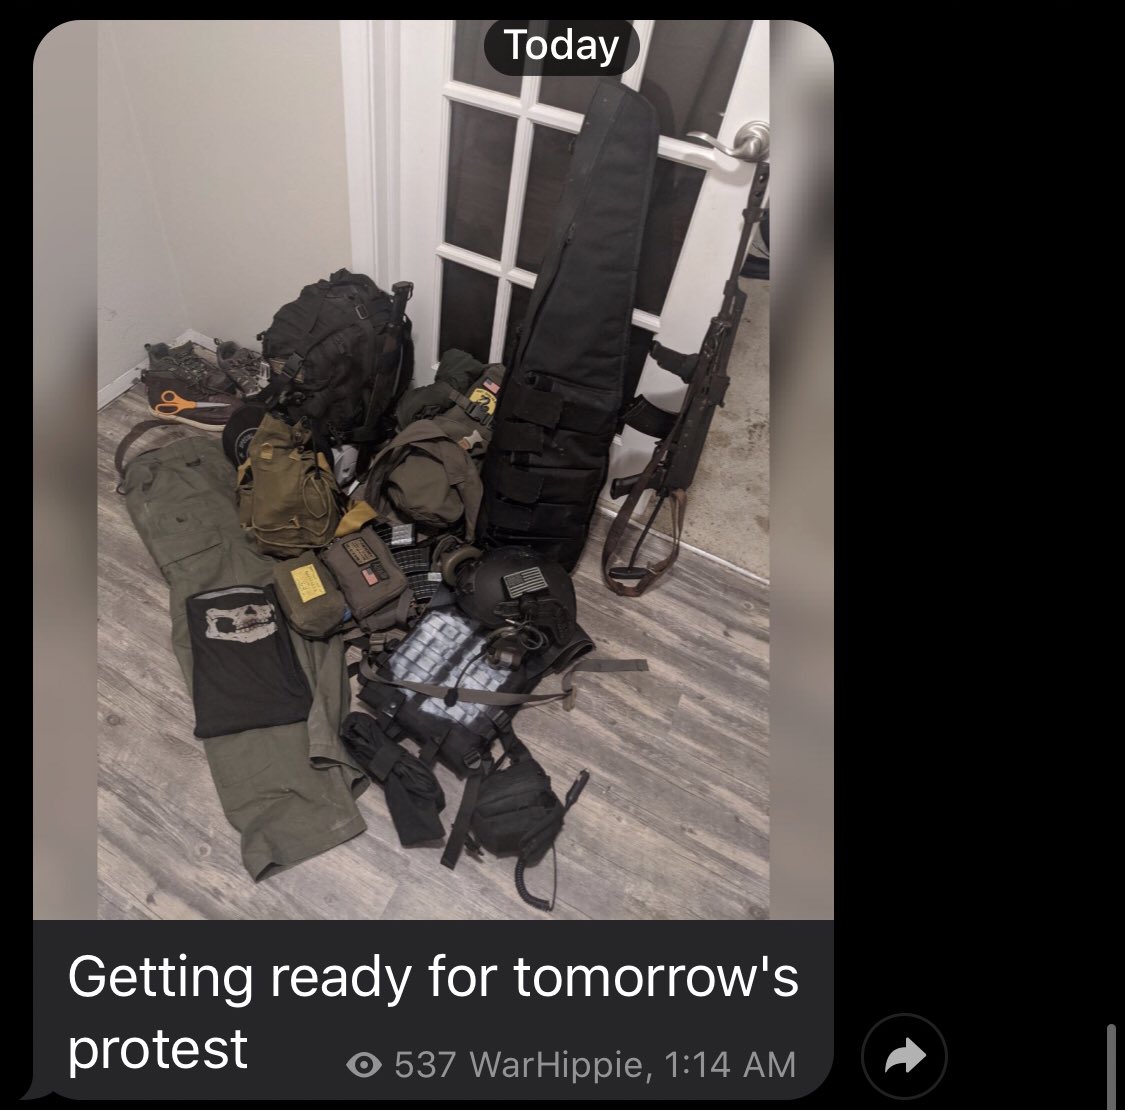 This tweet is what he shared minutes before uploading the video. He also posted his load out earlier today.